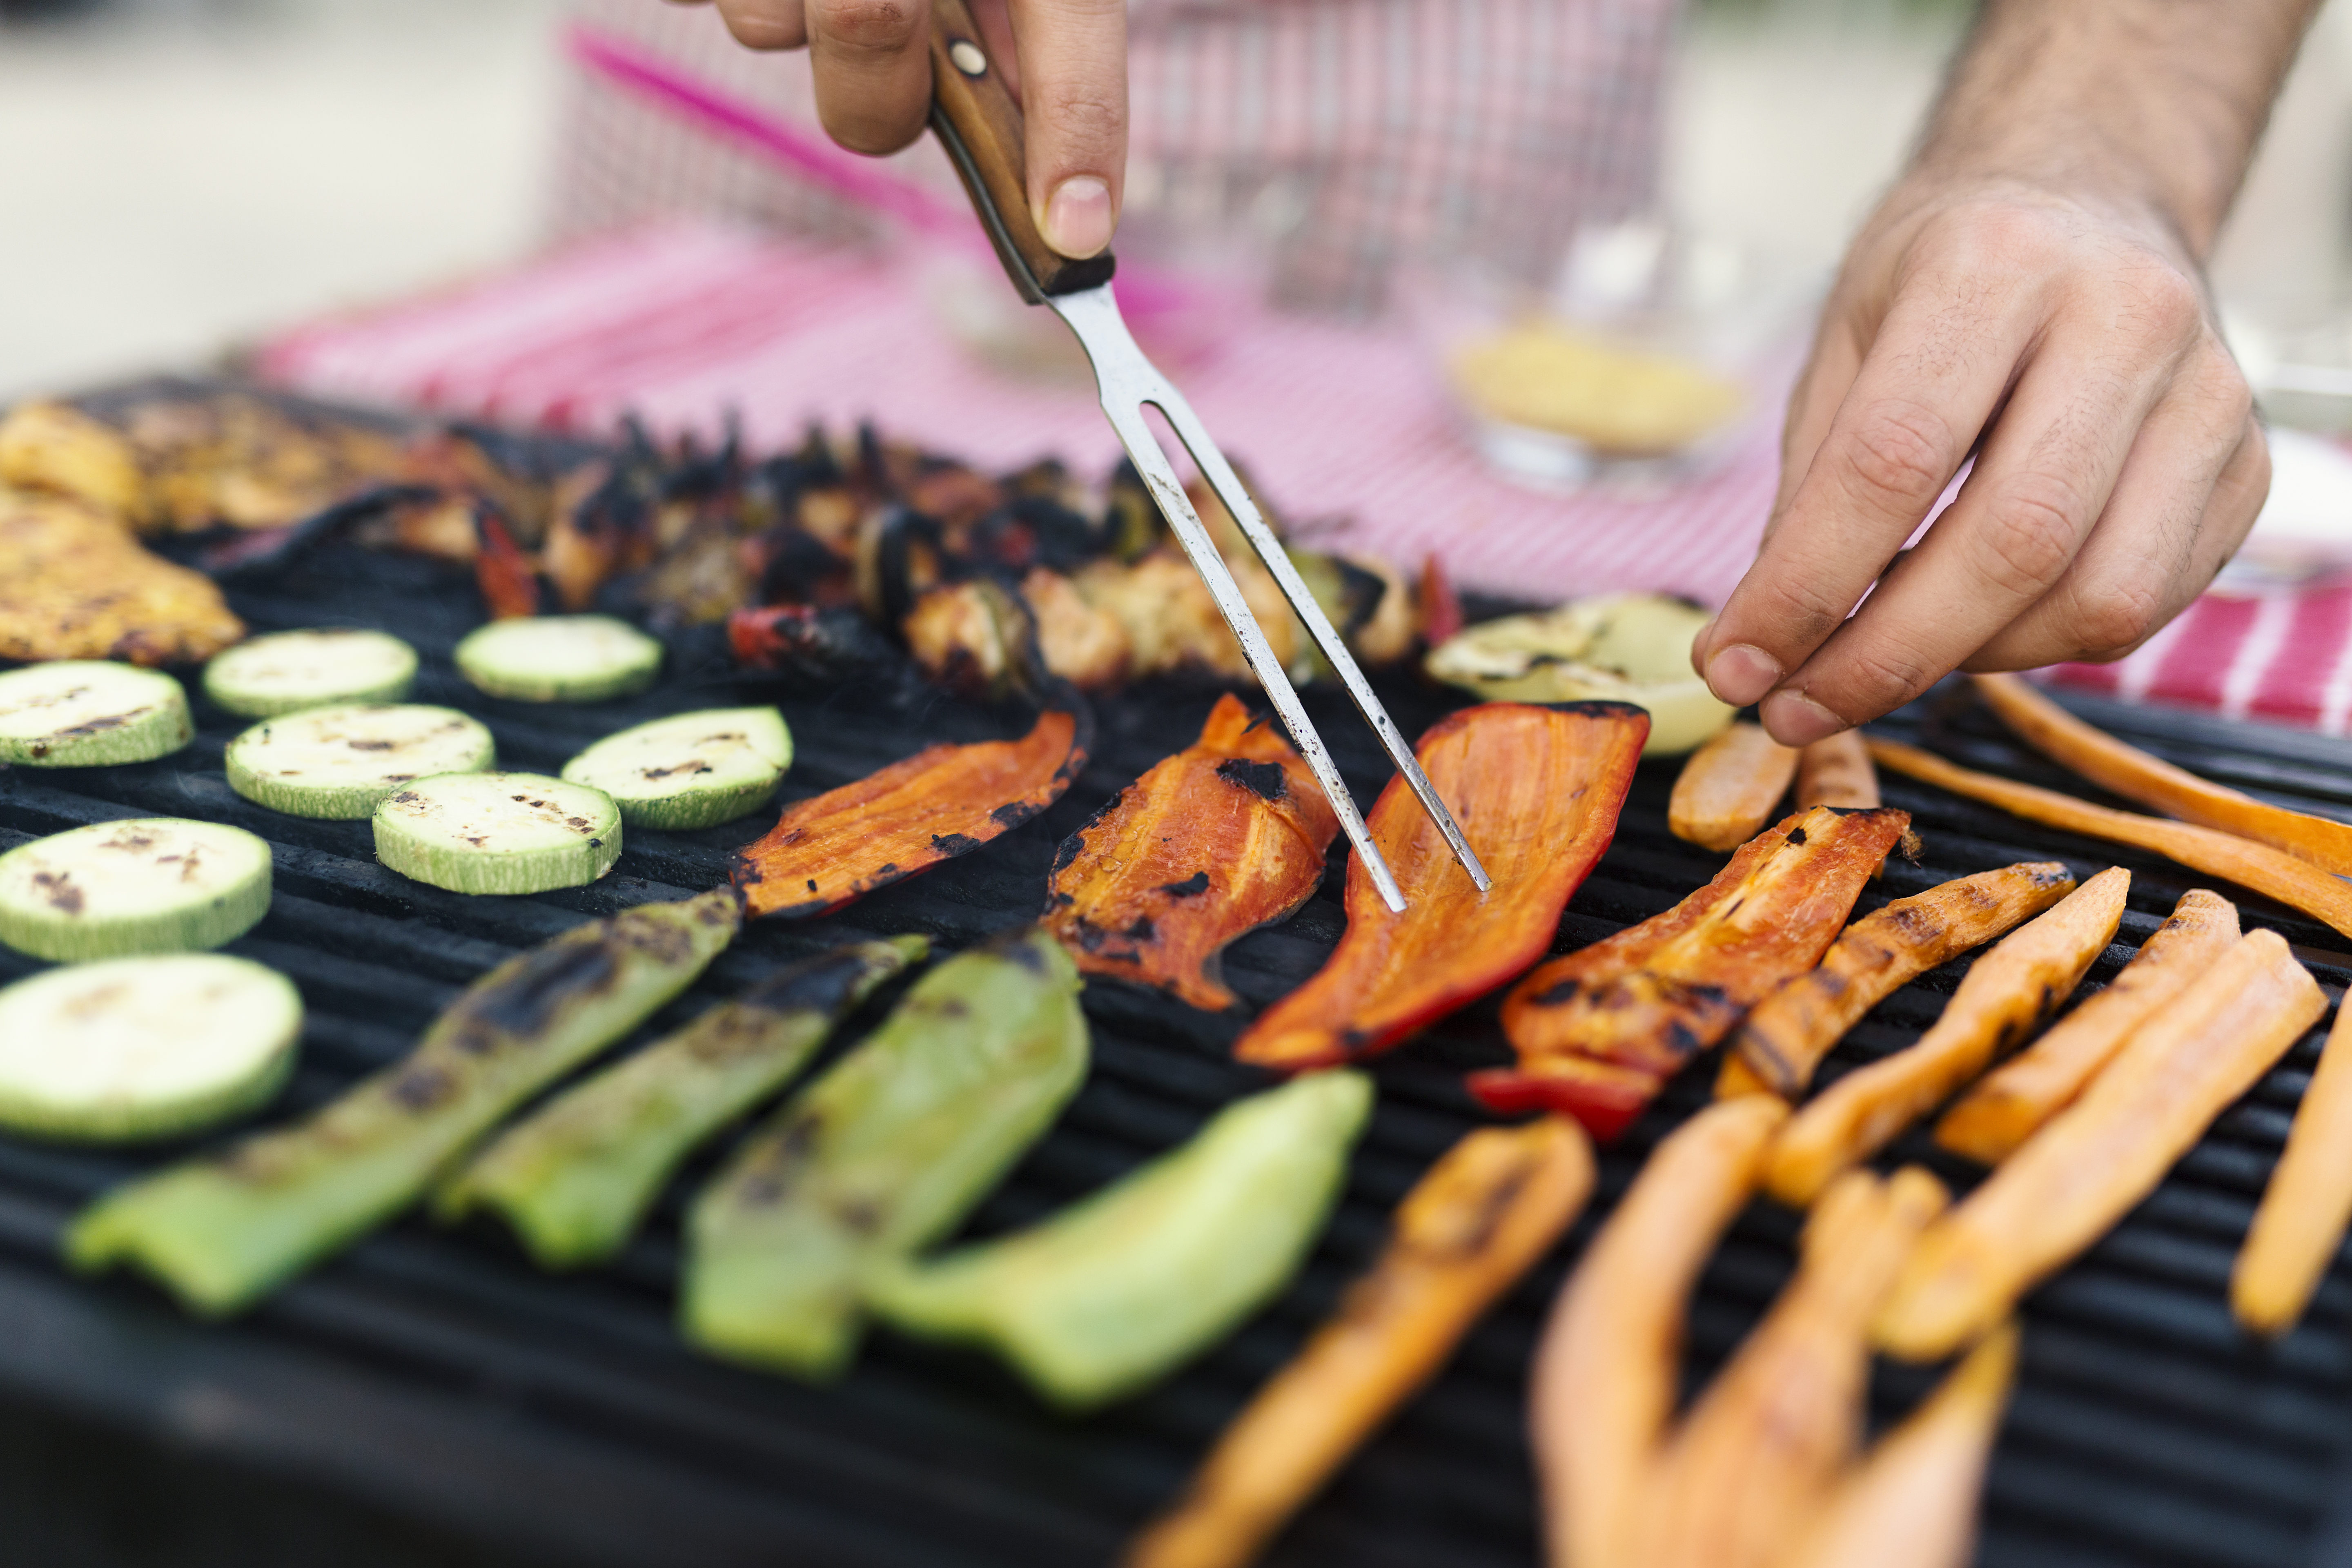 25 Delicious Ways to Lighten up Your Summer Grilling